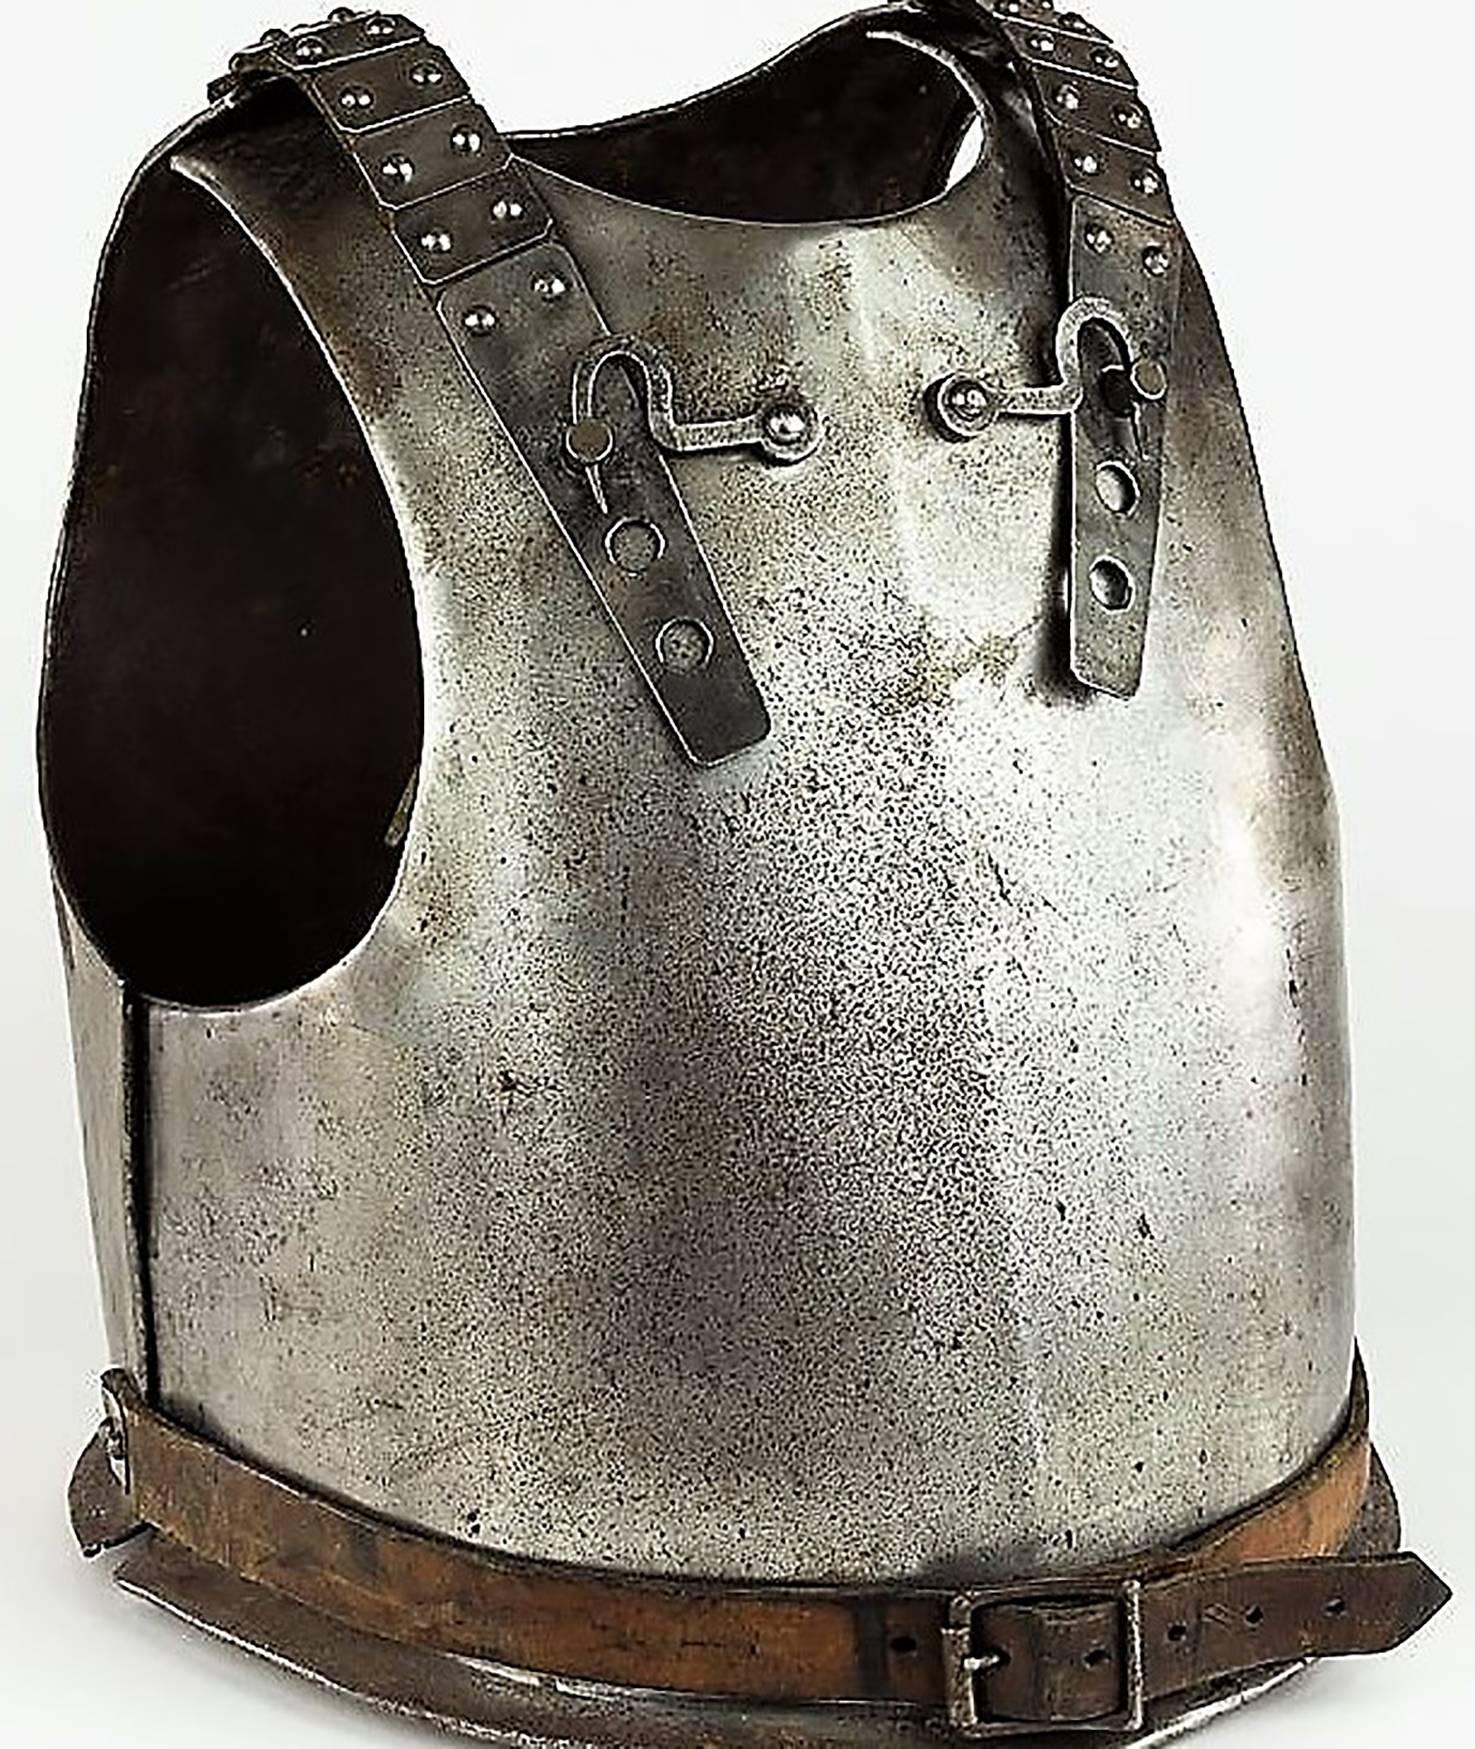 Original 18th Century European Cuirass Plate Armor (Breastplate and Backplate) - Art by Unknown